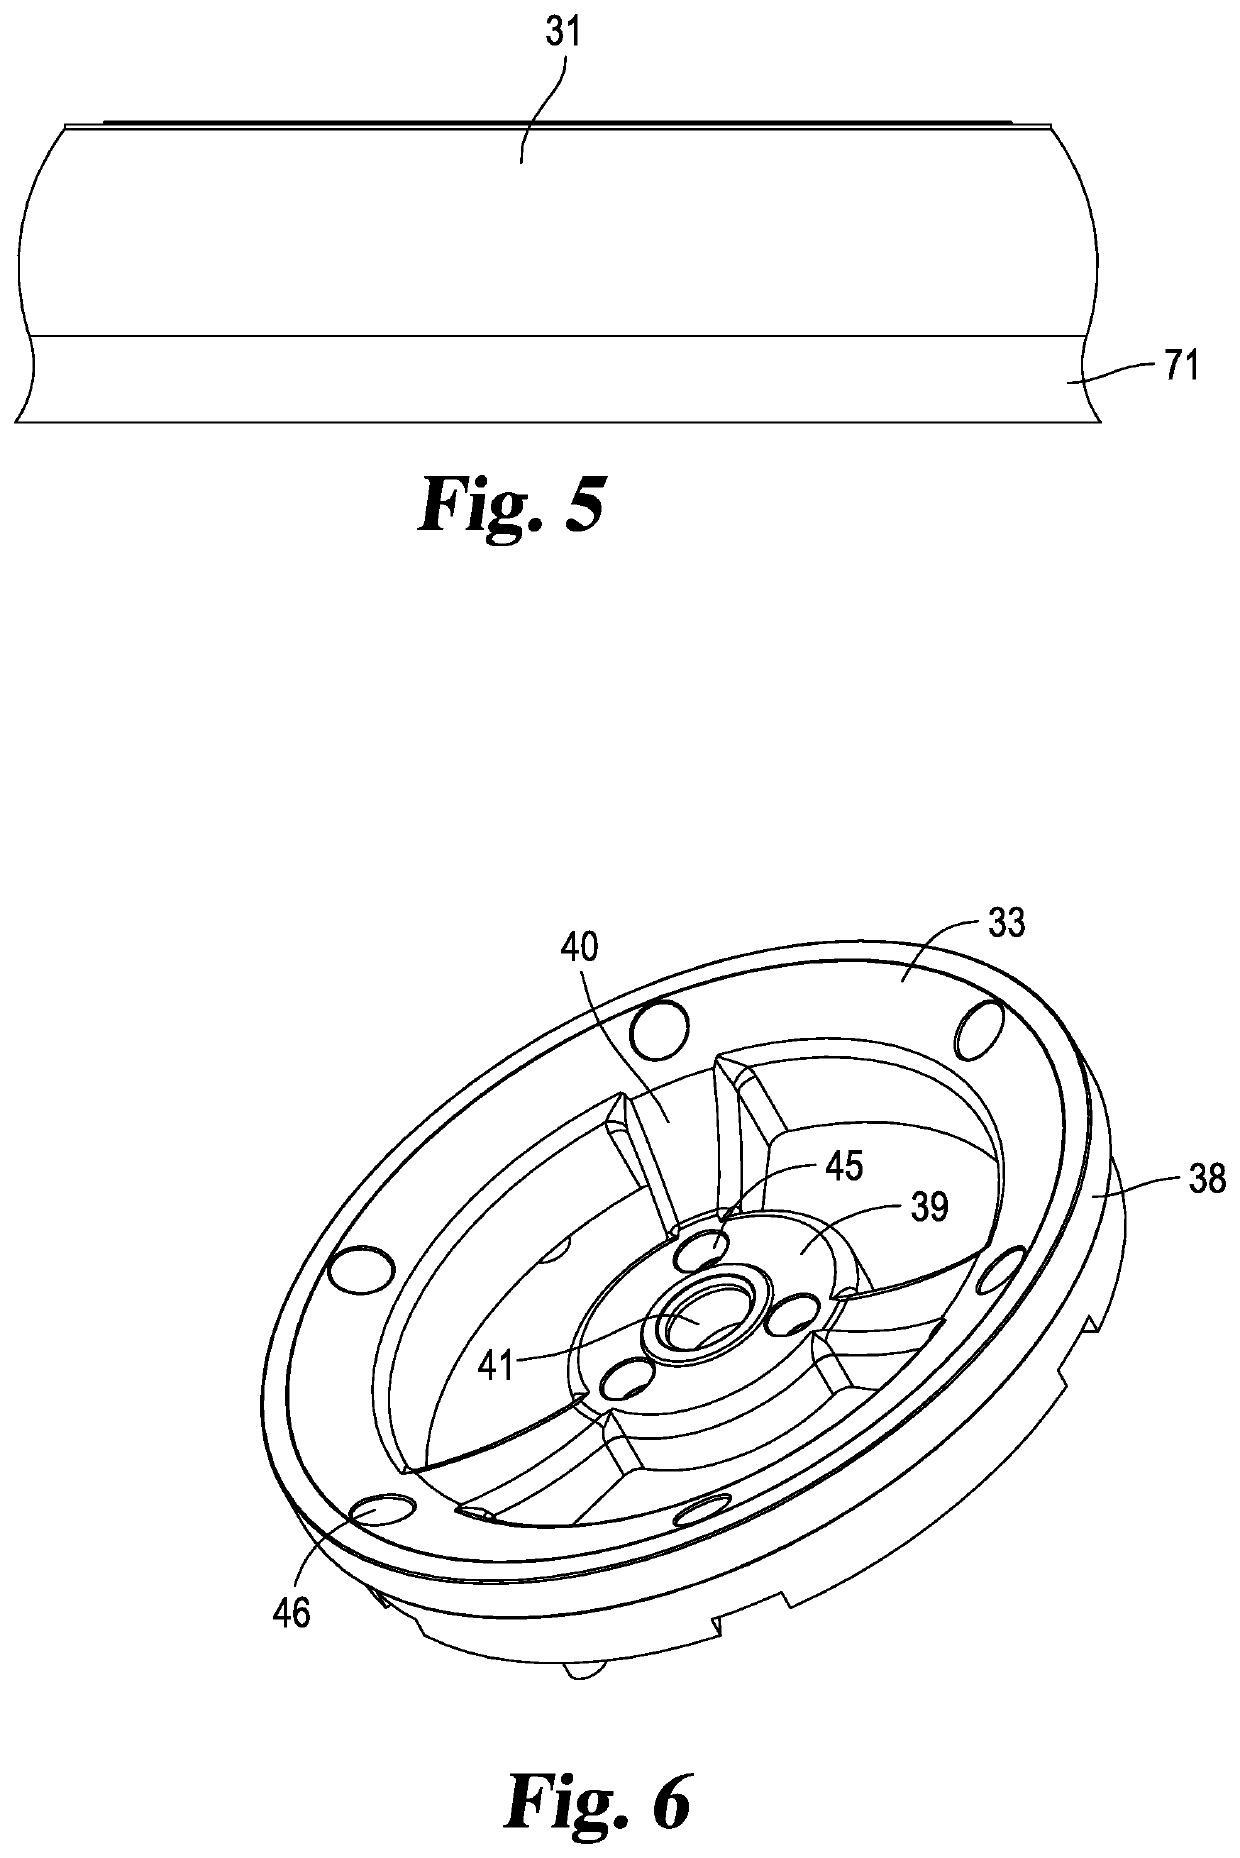 Two piece rim and tire connected assembly